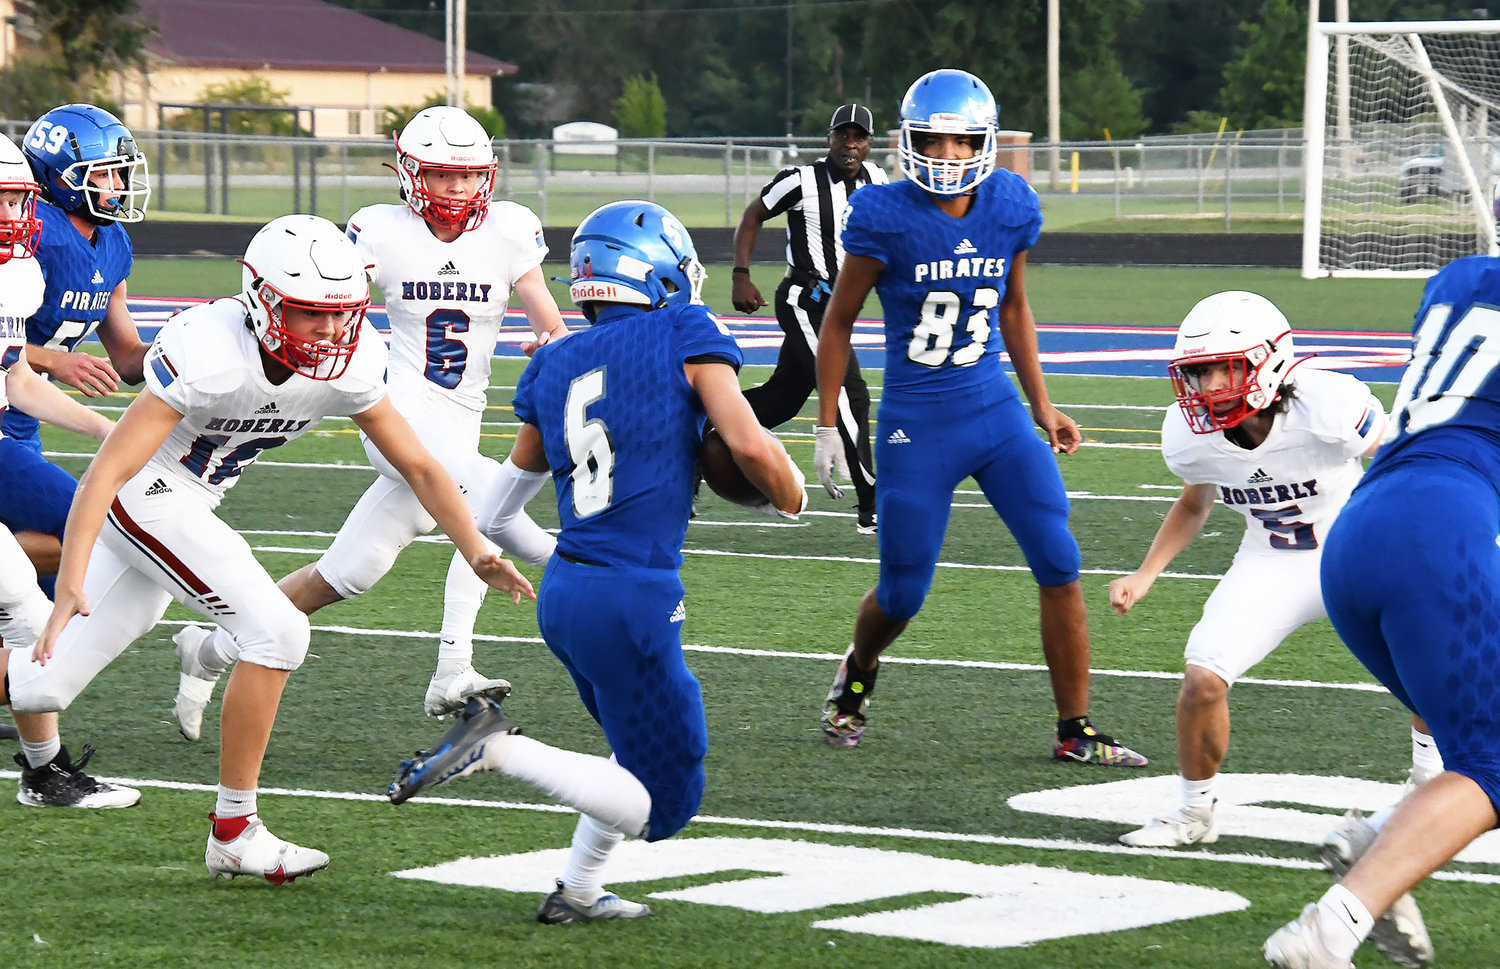 From left, Moberly's Levi Moran, Nick Kessler and Brett Gelina surround a Boonville ball carrier during Friday's scrimmage.